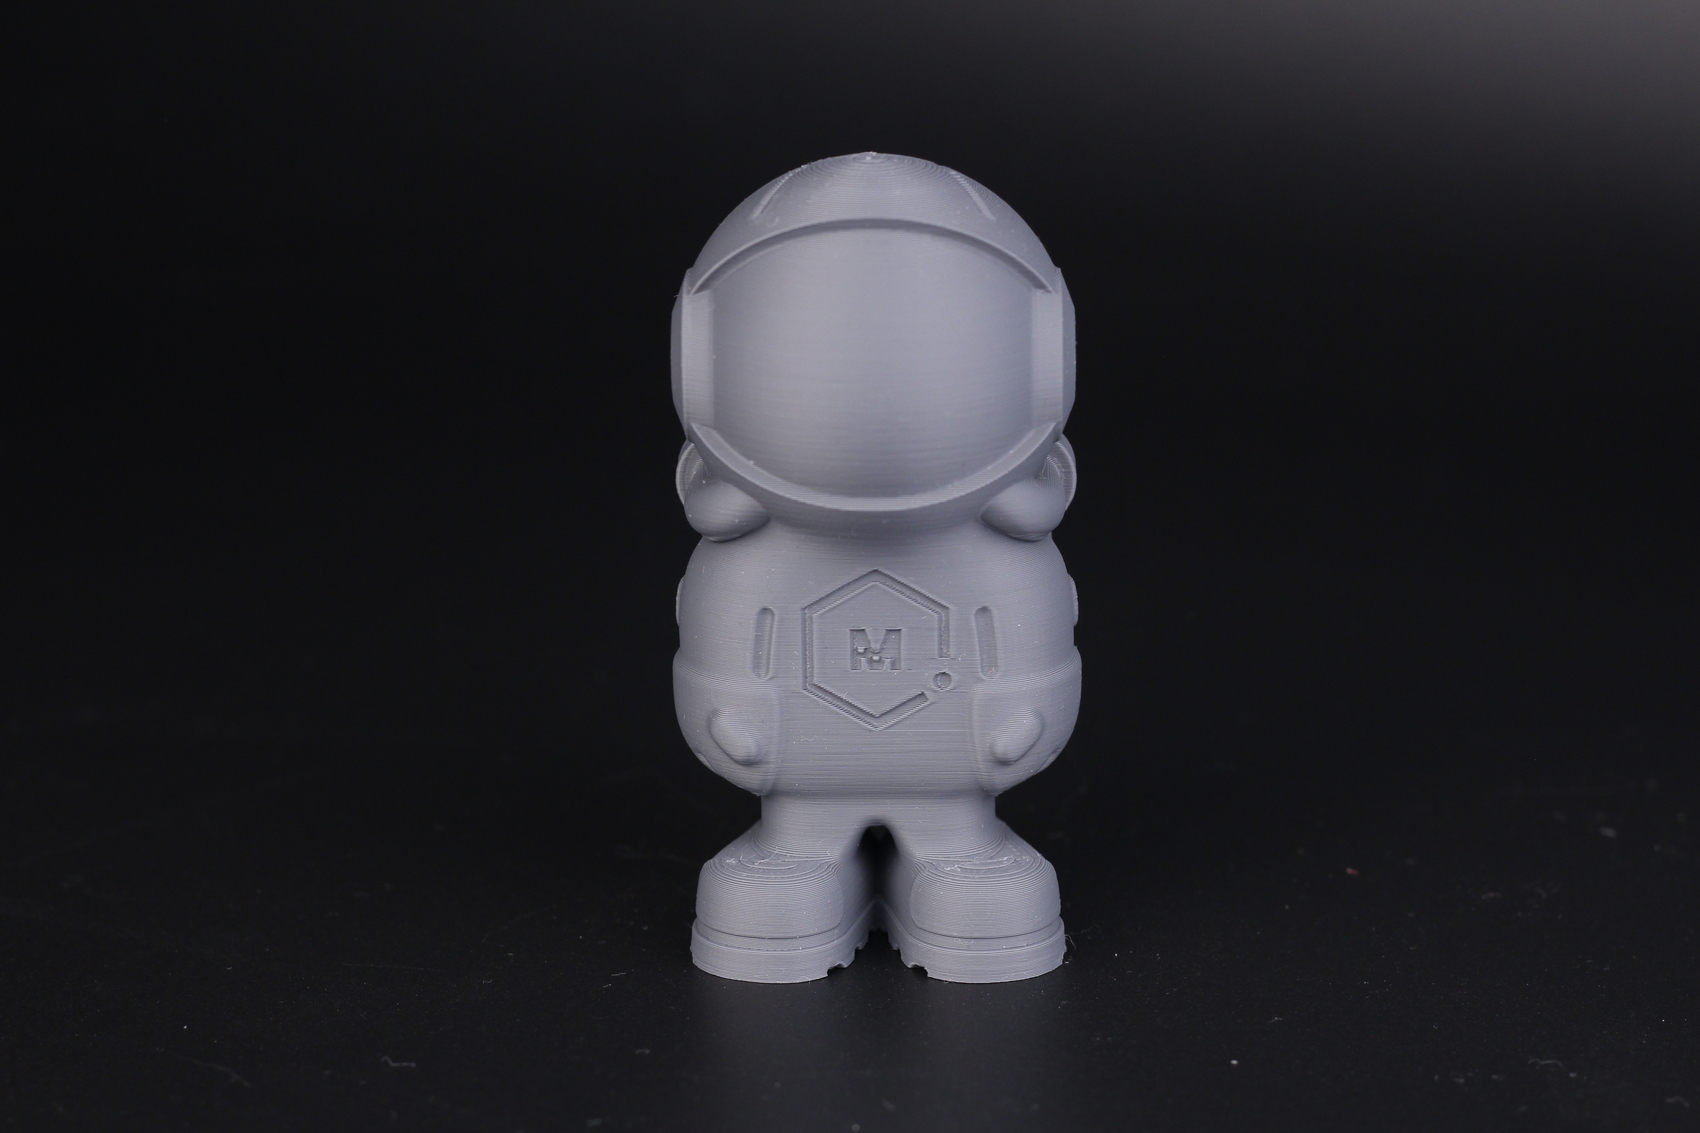 Phil A Ment printed on Ender 3 S1 Pro1 | Creality Ender 3 S1 Pro Review: The Ultimate Ender 3